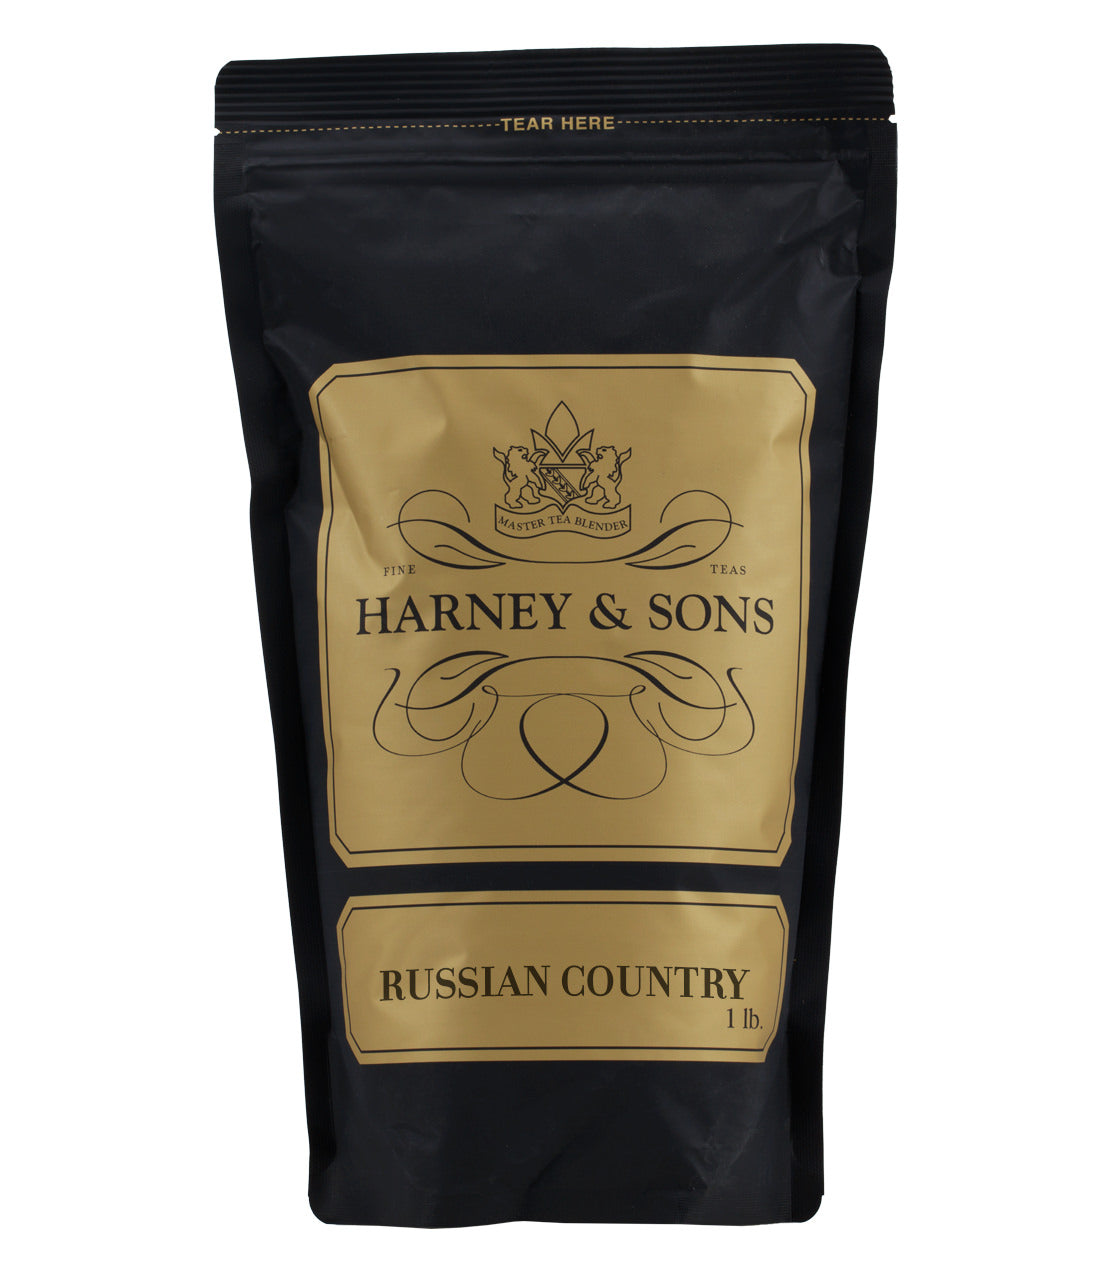 Russian Country - Loose 1 lb. Bag - Harney & Sons Fine Teas